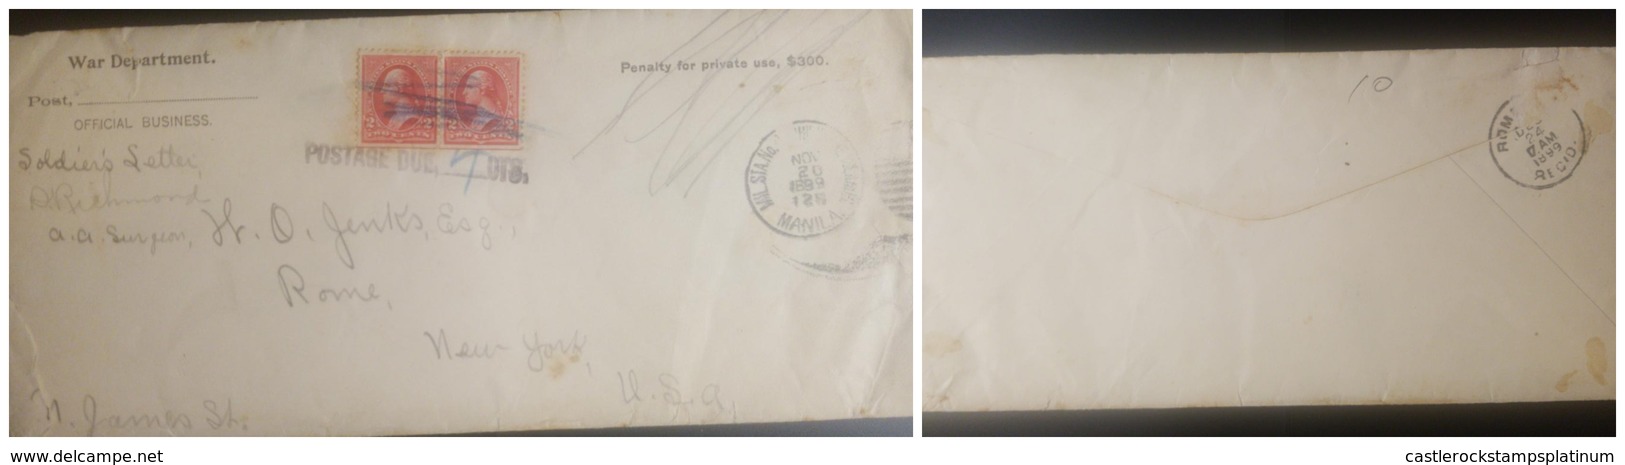 O) 1899 PHILIPPINES. US OCCUPATION,PENALTY FOR PRIVATE - WAR DEPARTMENT - OFFICIAL BUSSINES - POSTAGE DUE WASHINGTON 2c, - Filippine